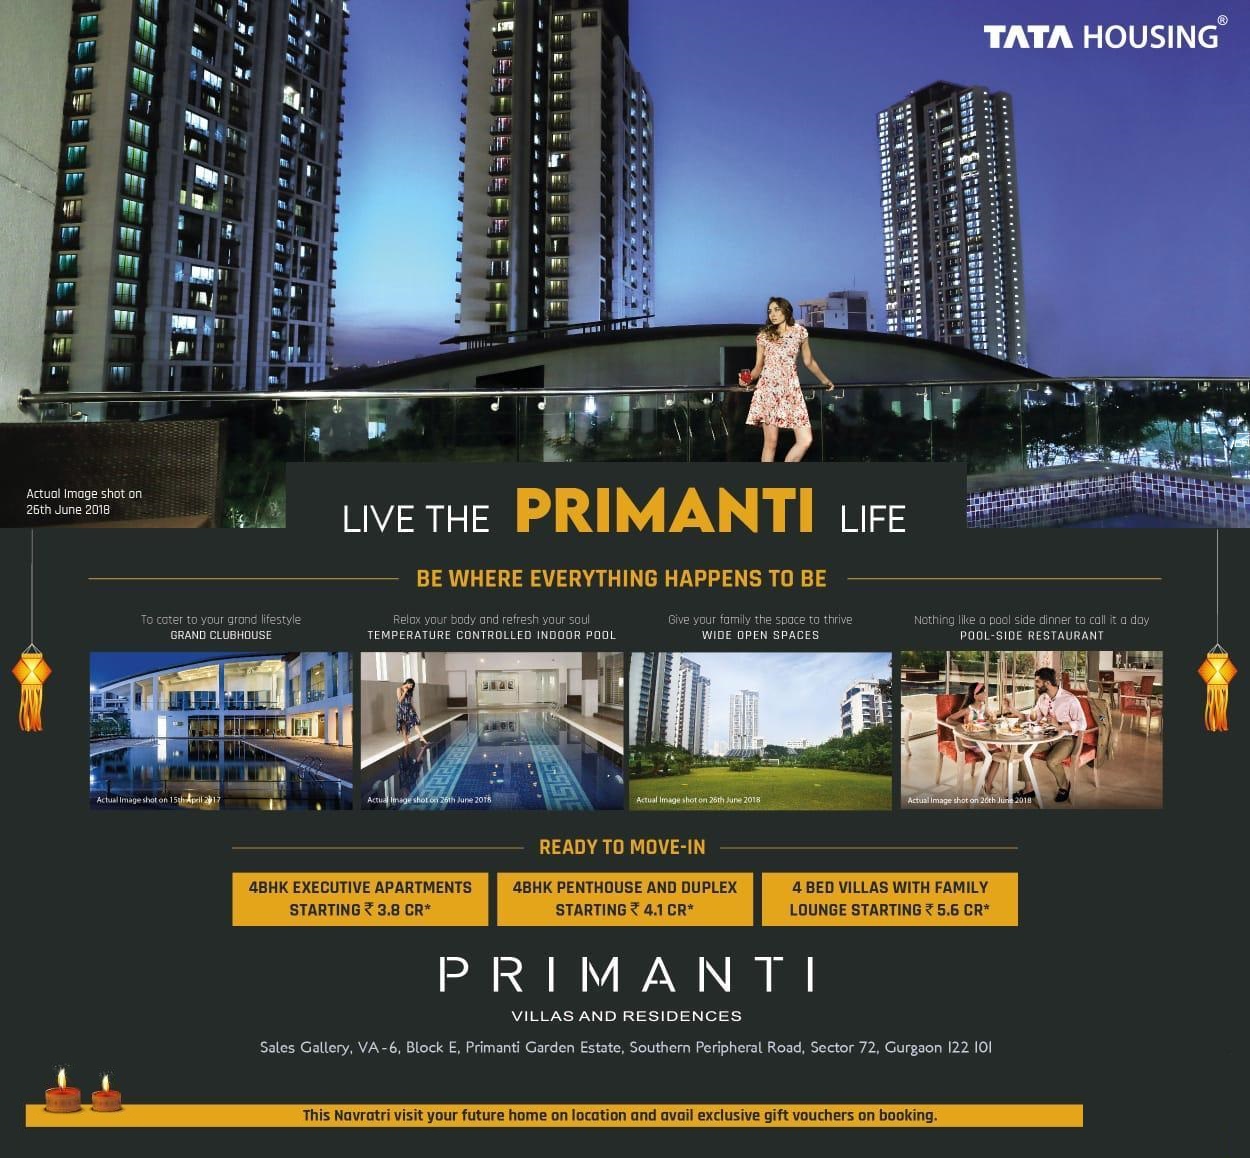 Avail special festive offer at Emaar Digihomes ini, Gurgaon